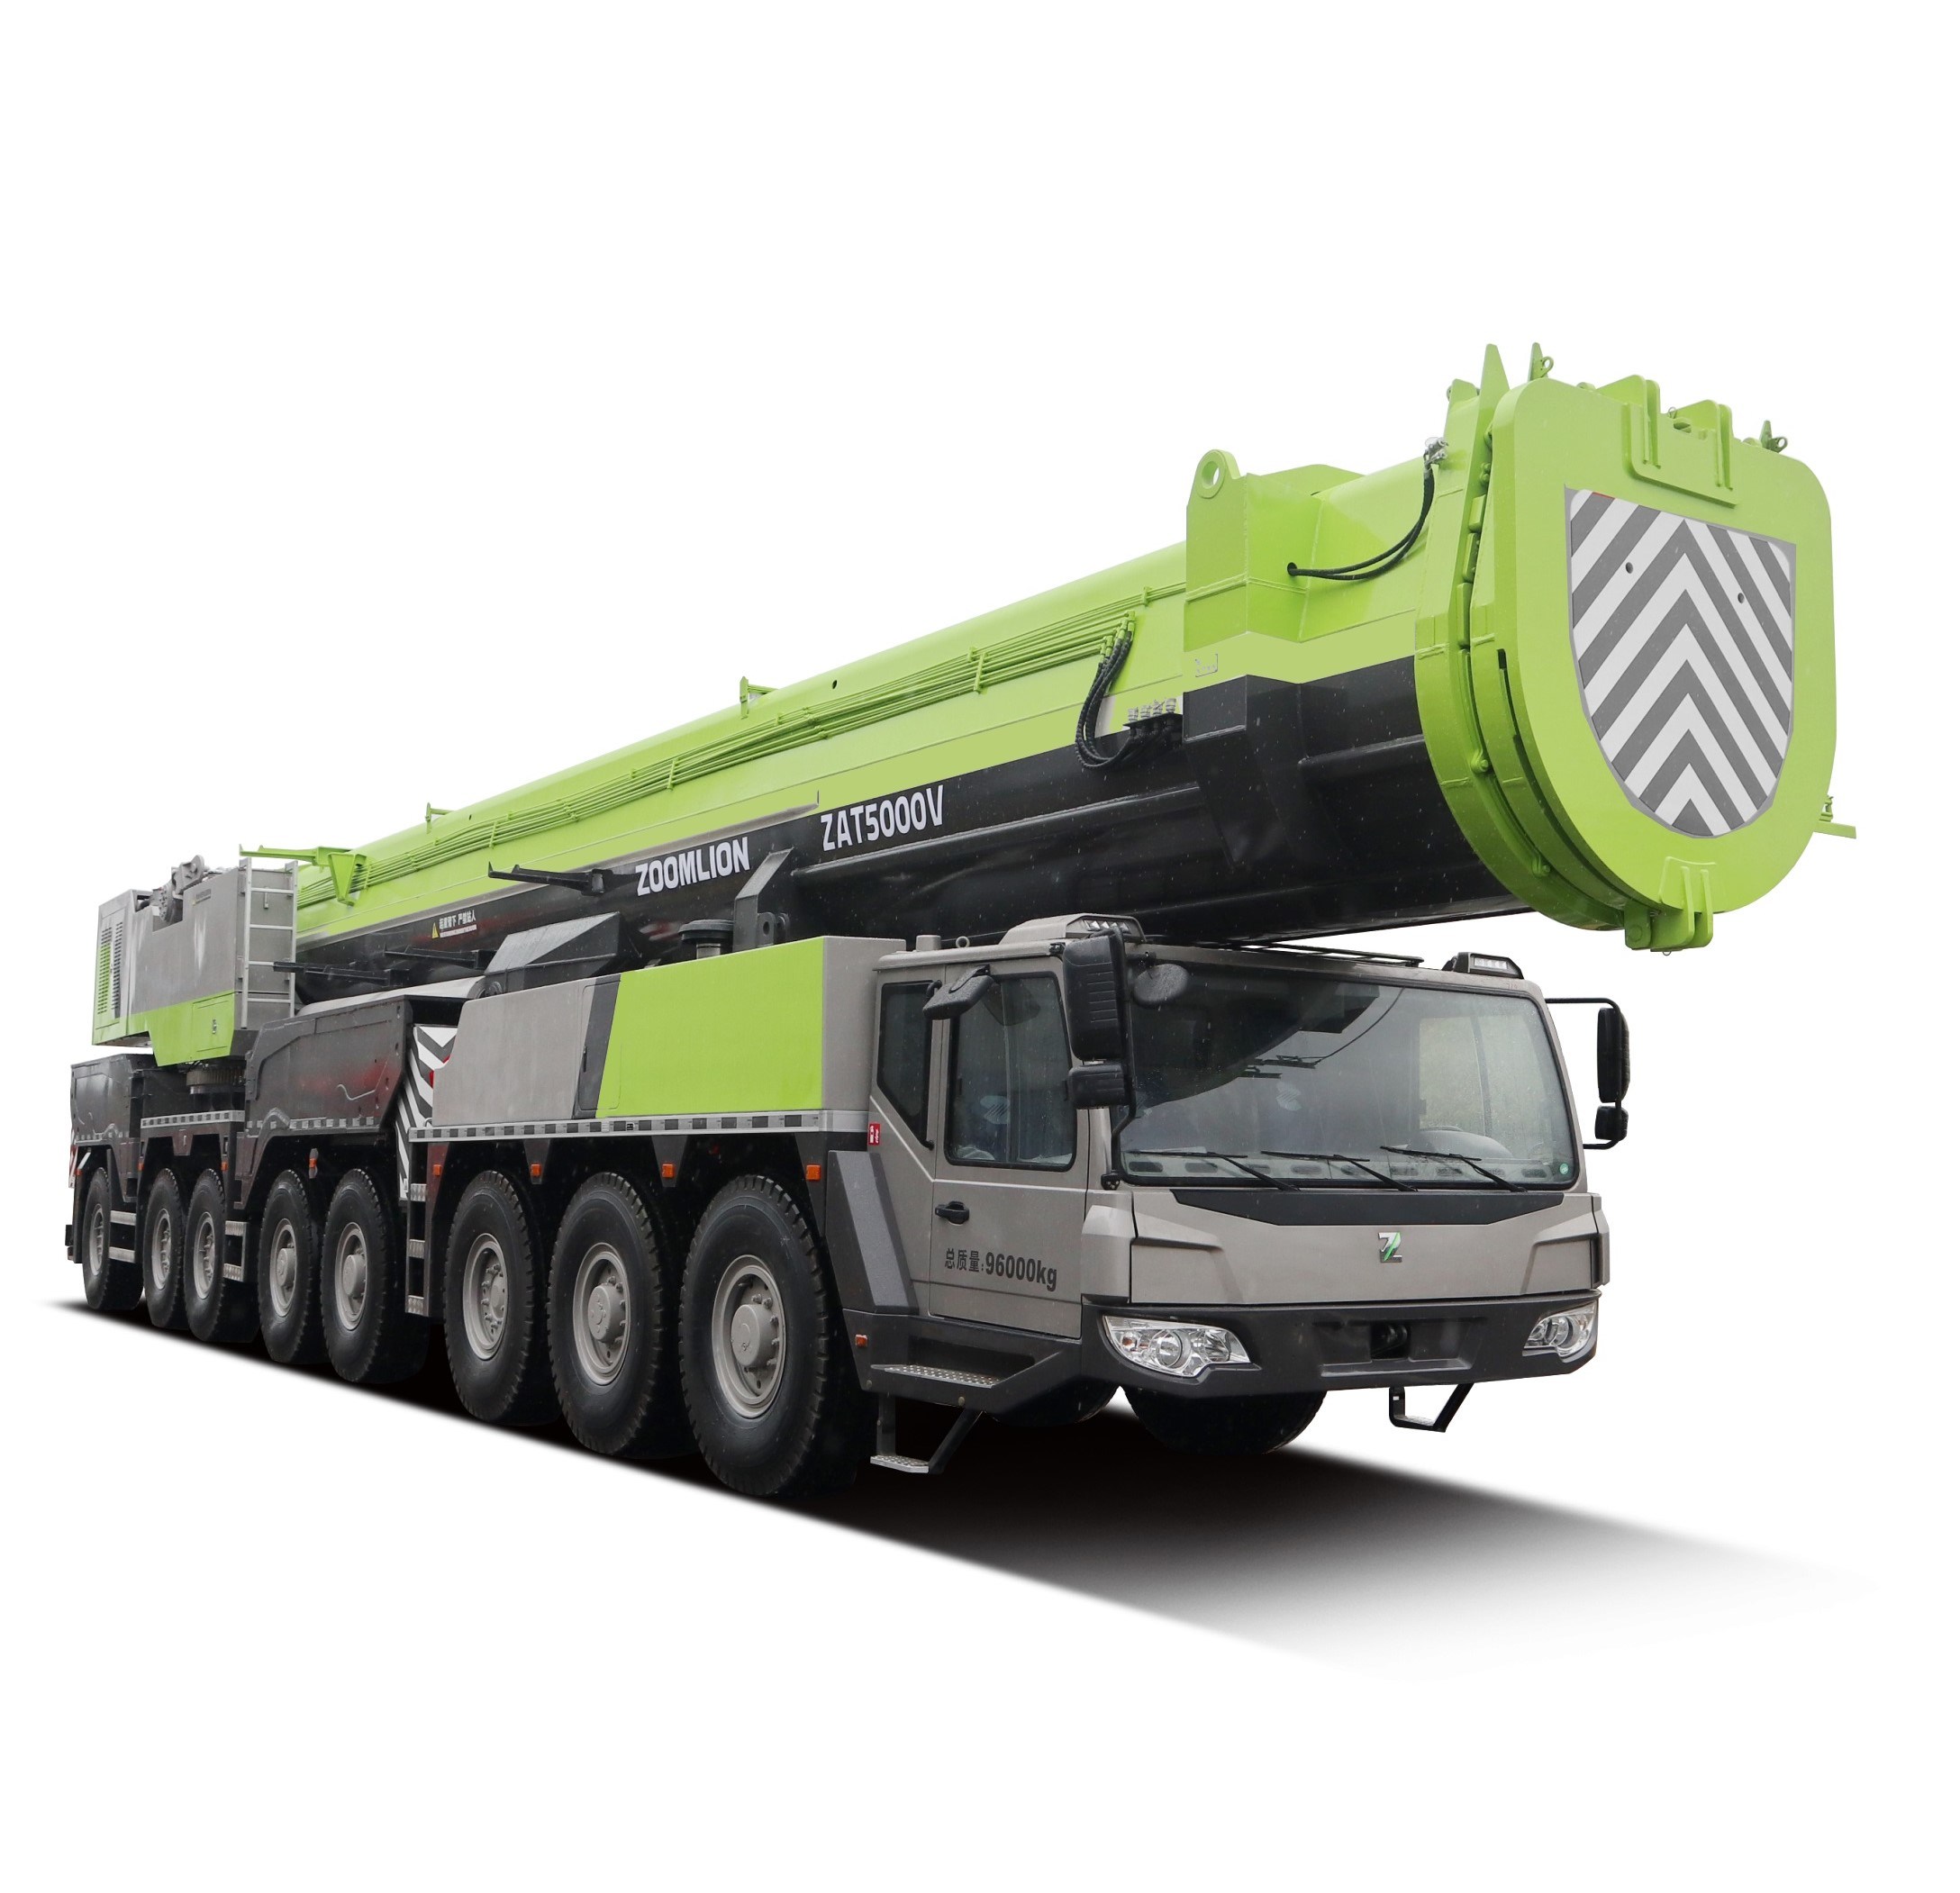 Large Construction Zoomlion 130 Ton All Terrain Hydraulic Truck Crane Ztc1300V with 7 Section 103.5m Reaching Height